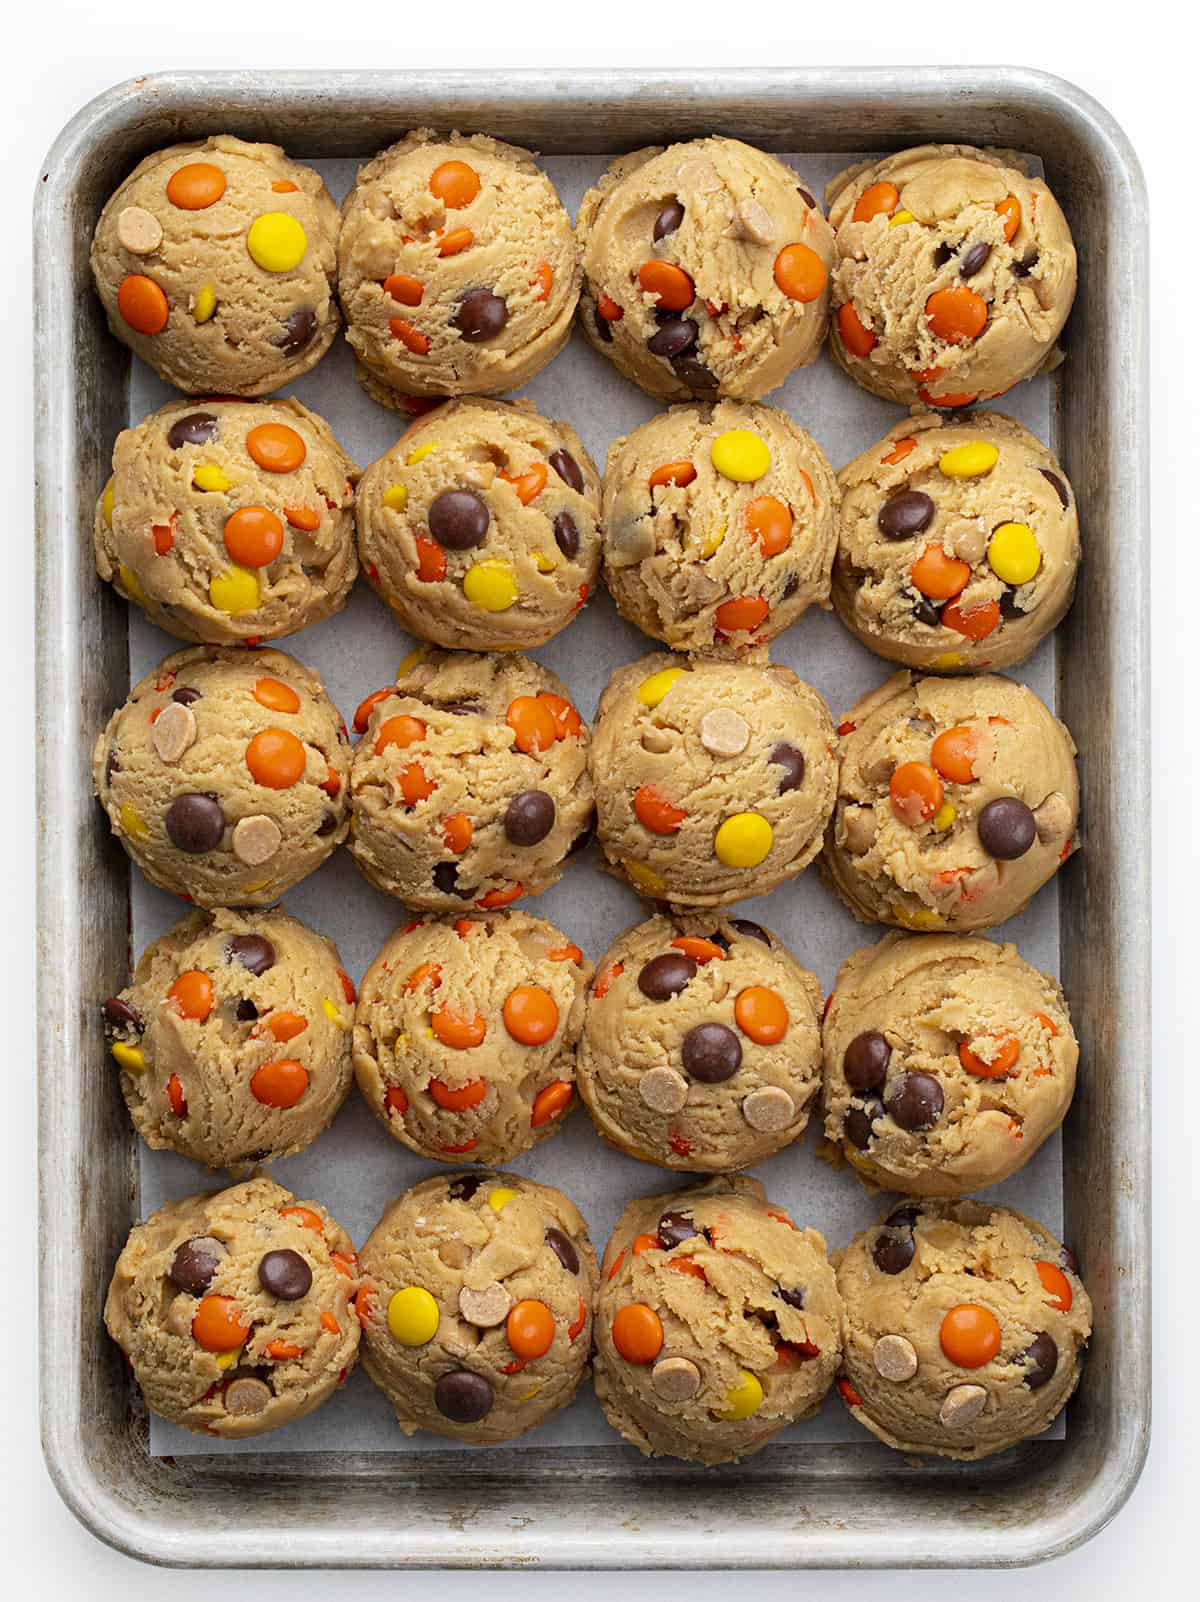 Reese's Pieces Peanut Butter Cookie Dough in Balls before Baking.